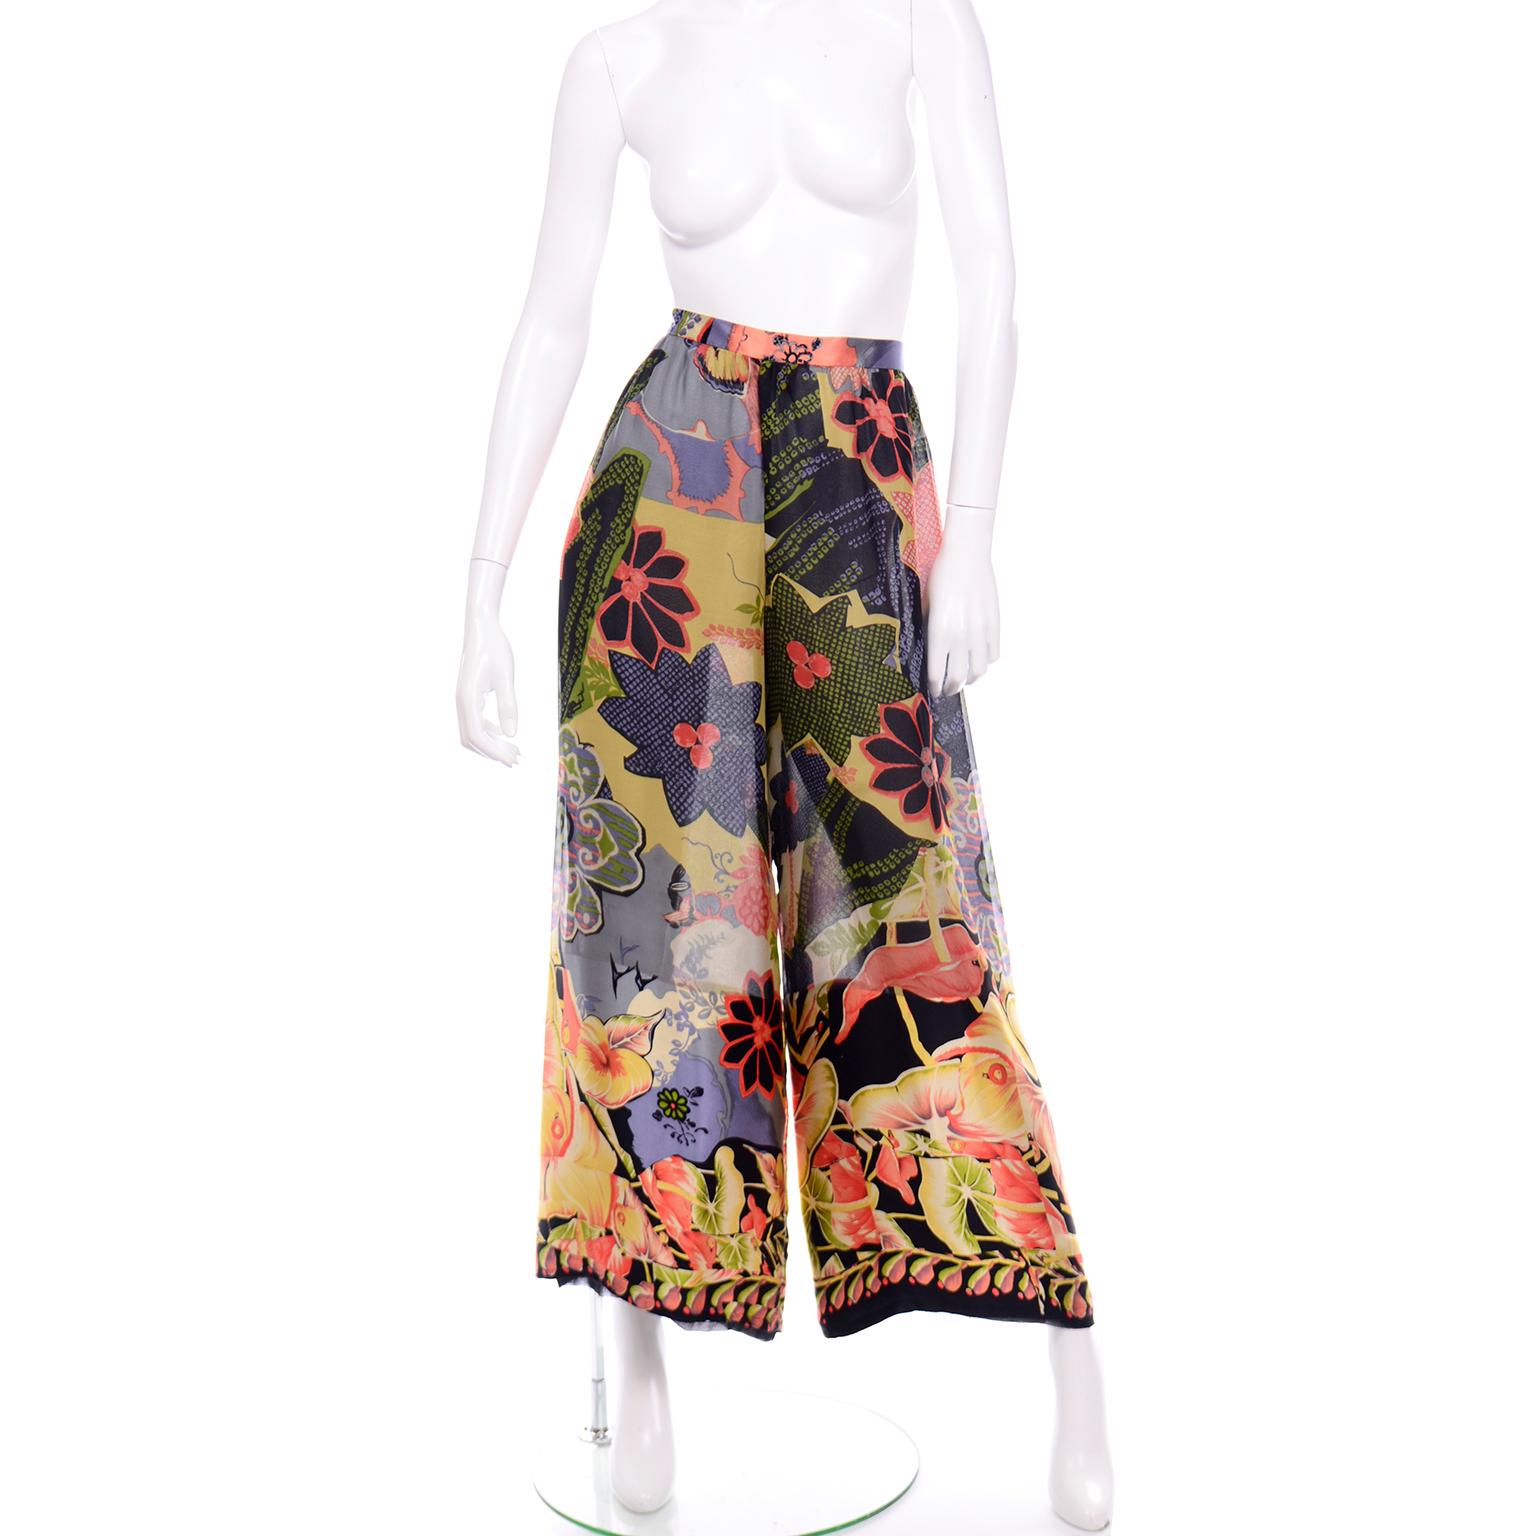 These fabulous vintage 1980's Christian Lacroix pants are in a beautiful floral abstract print silk chiffon. The bold tropical botanical print is in shades of green, purple, salmon, yellow and black. These high waisted, wide leg trousers would be